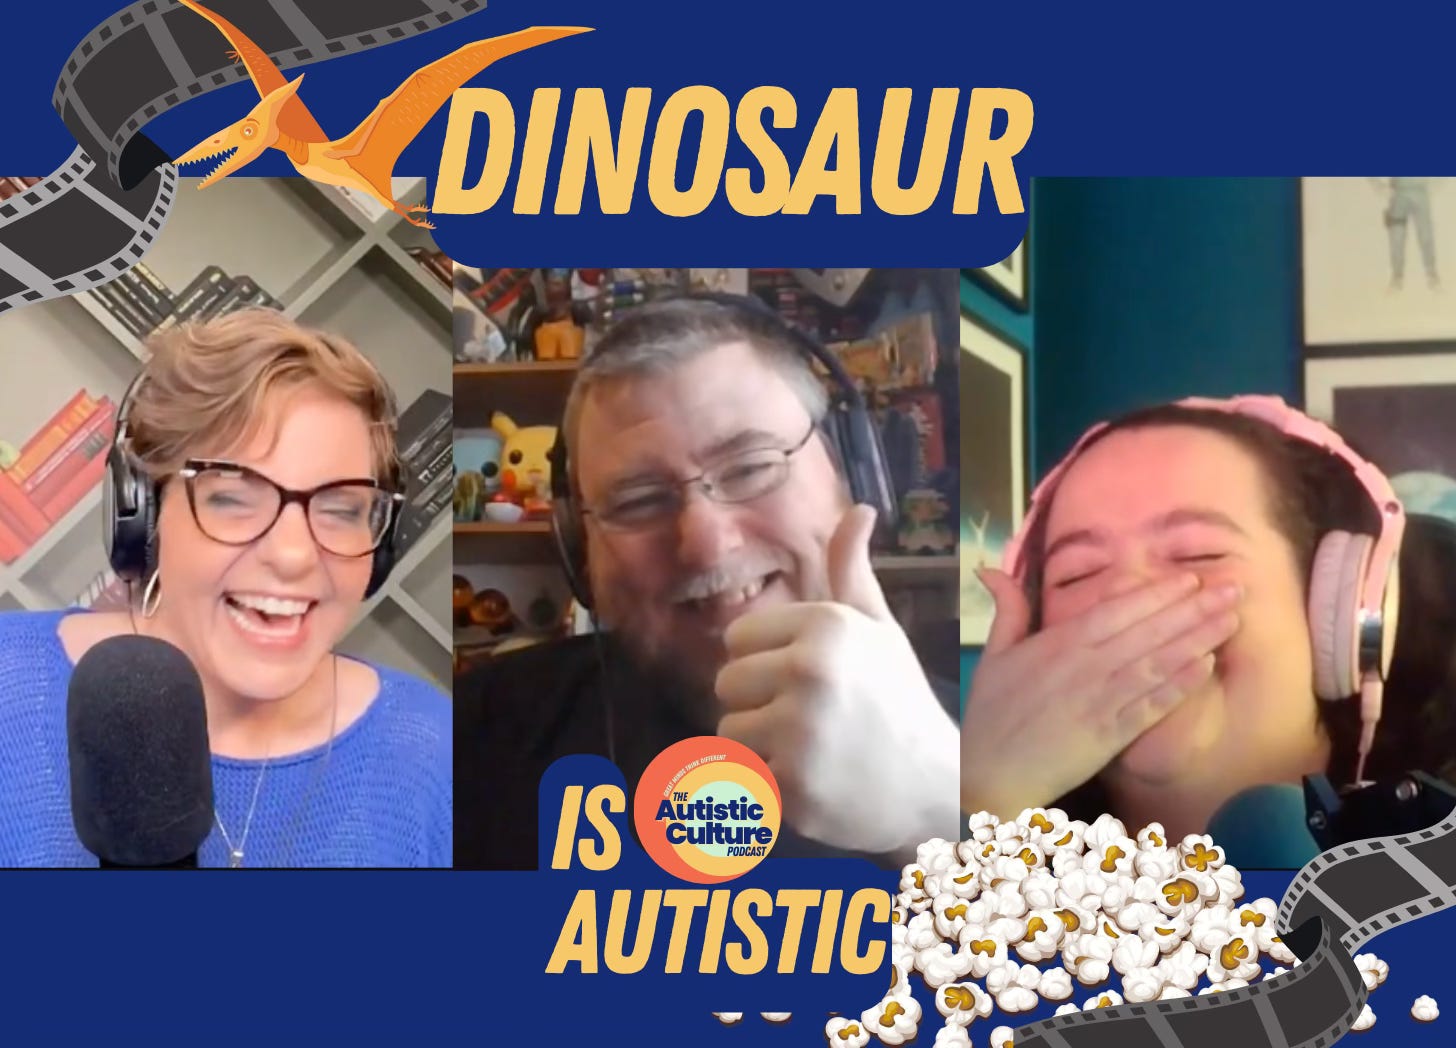 Autistic podcast hosts, Dr. Angela Lauria and Matt Lowry LPP, are joined by guest, Ashley Storrie to record a podcast titled: Dinosaur is Autistic. Dinosaur and film accents complete the image.